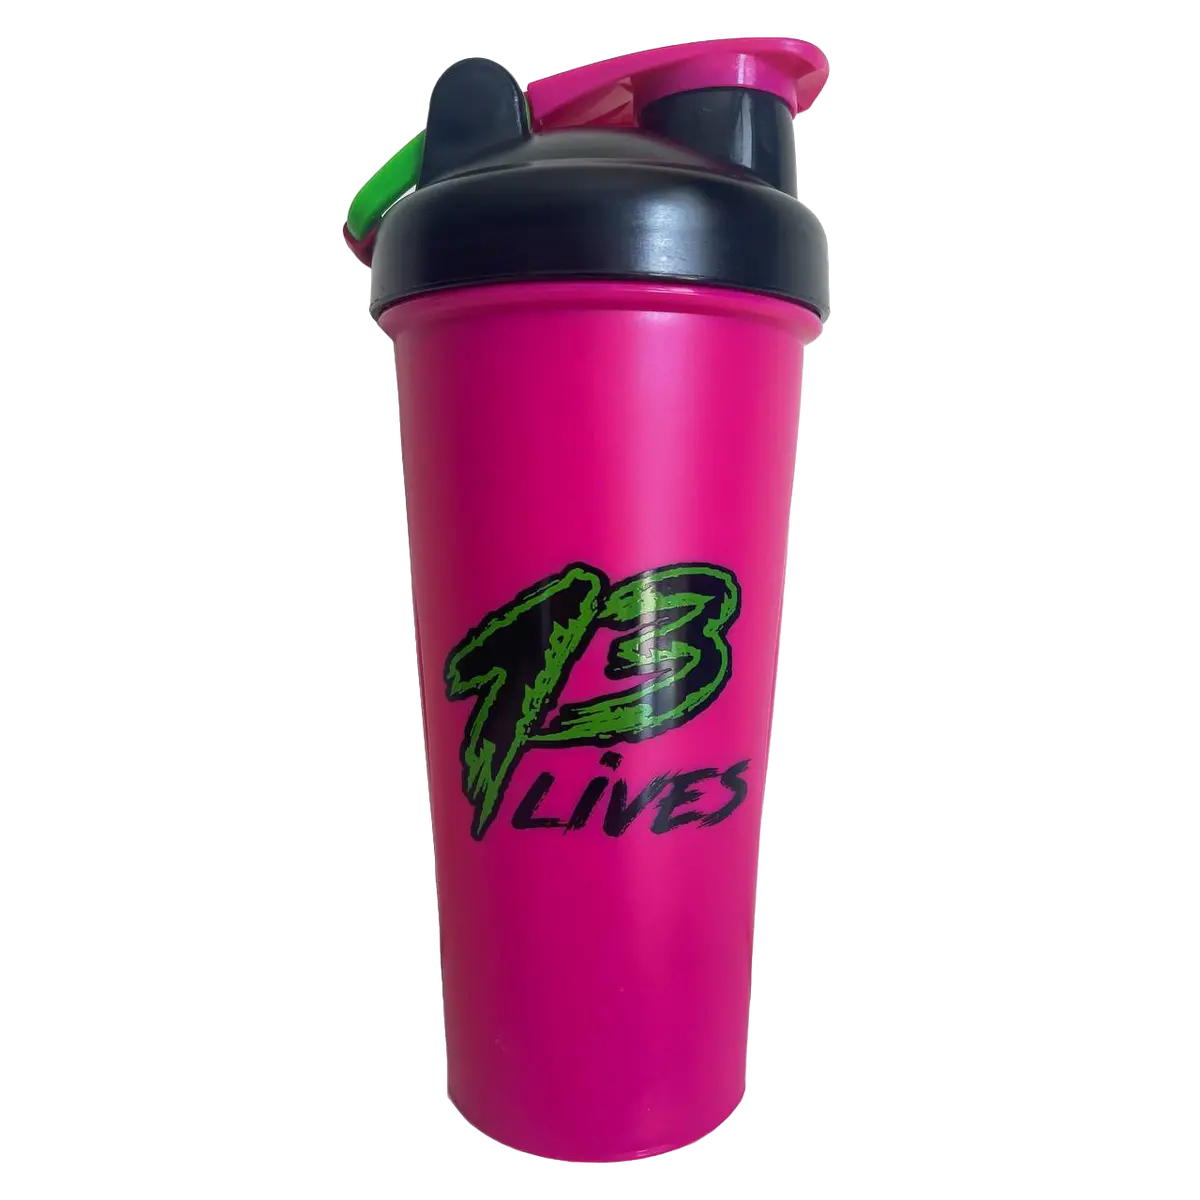 Buy online premium quality SHAKER | Australia's leading Brand For Pure Clean Protein Supplements - 13lives